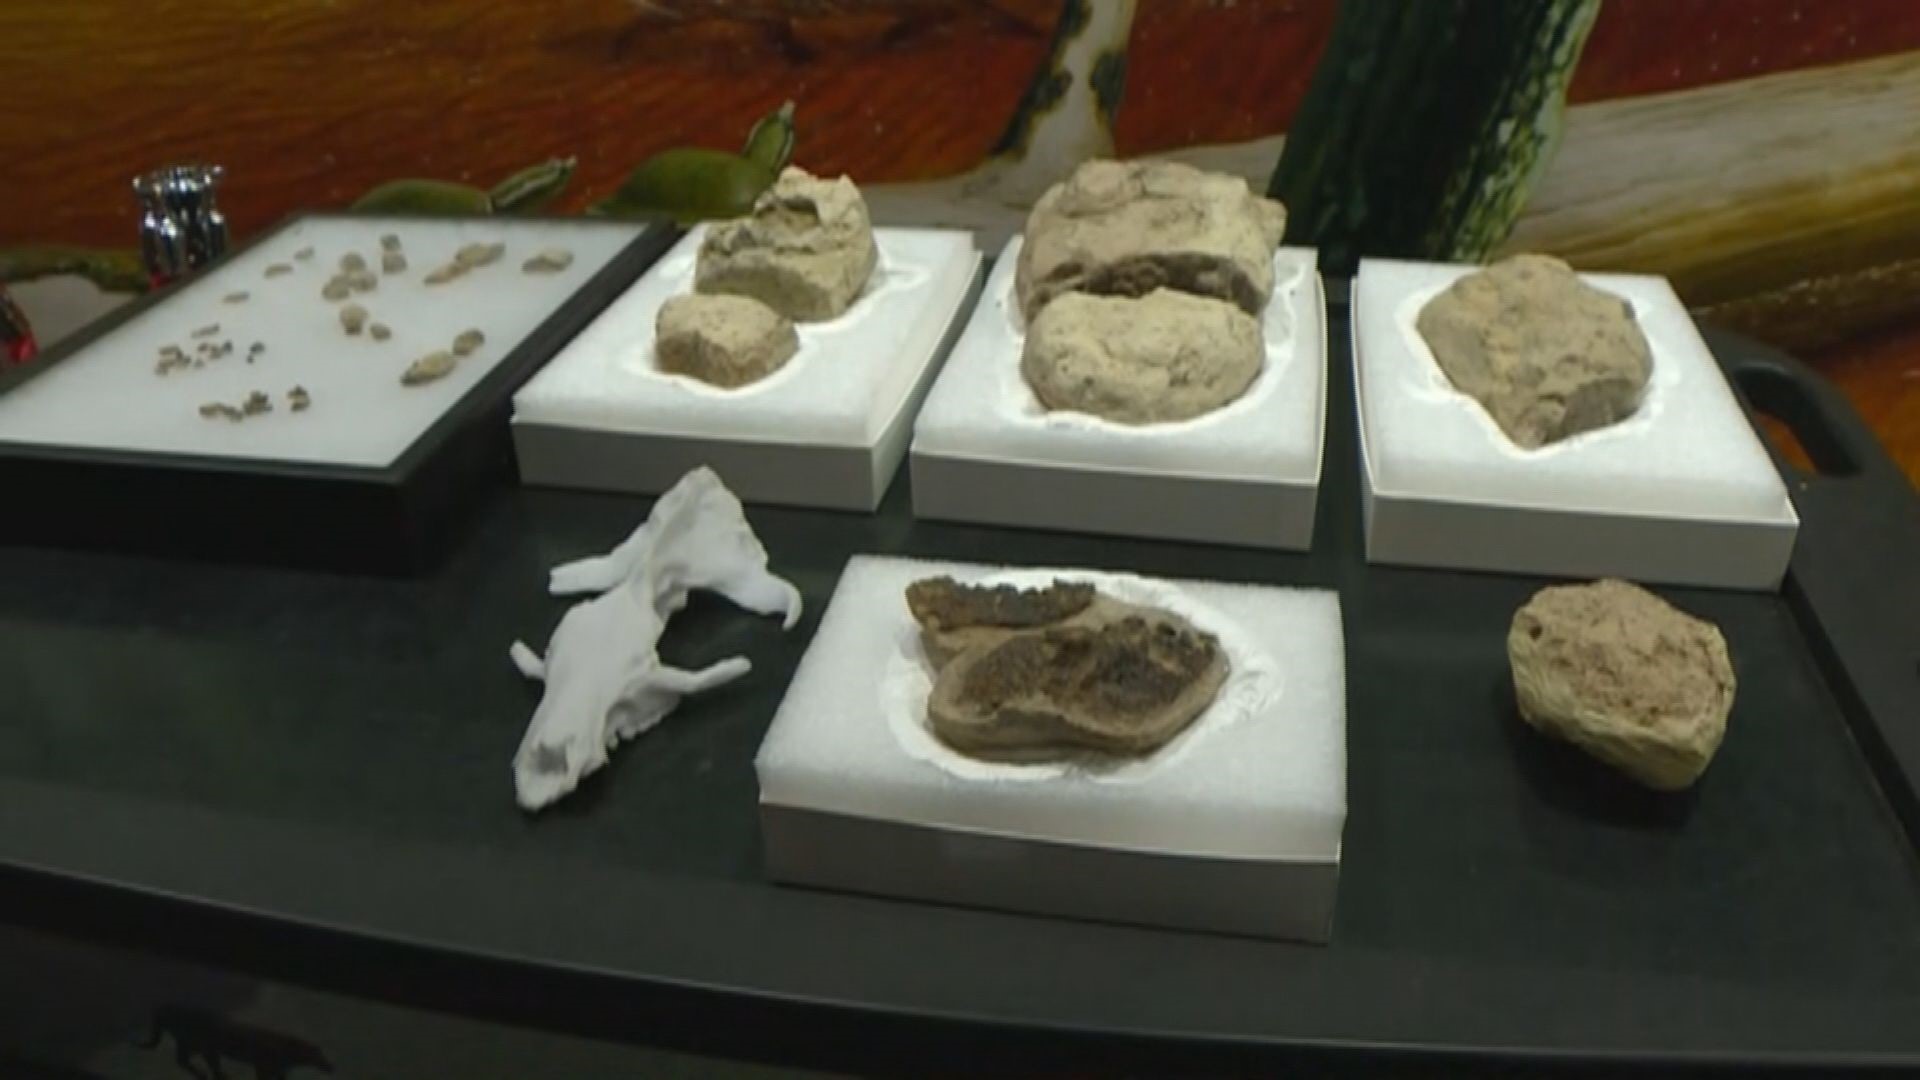 Scientists at the Denver Museum of Nature and Science revealed that rare fossils were found in Colorado Springs from the time after the dinosaur extinction.